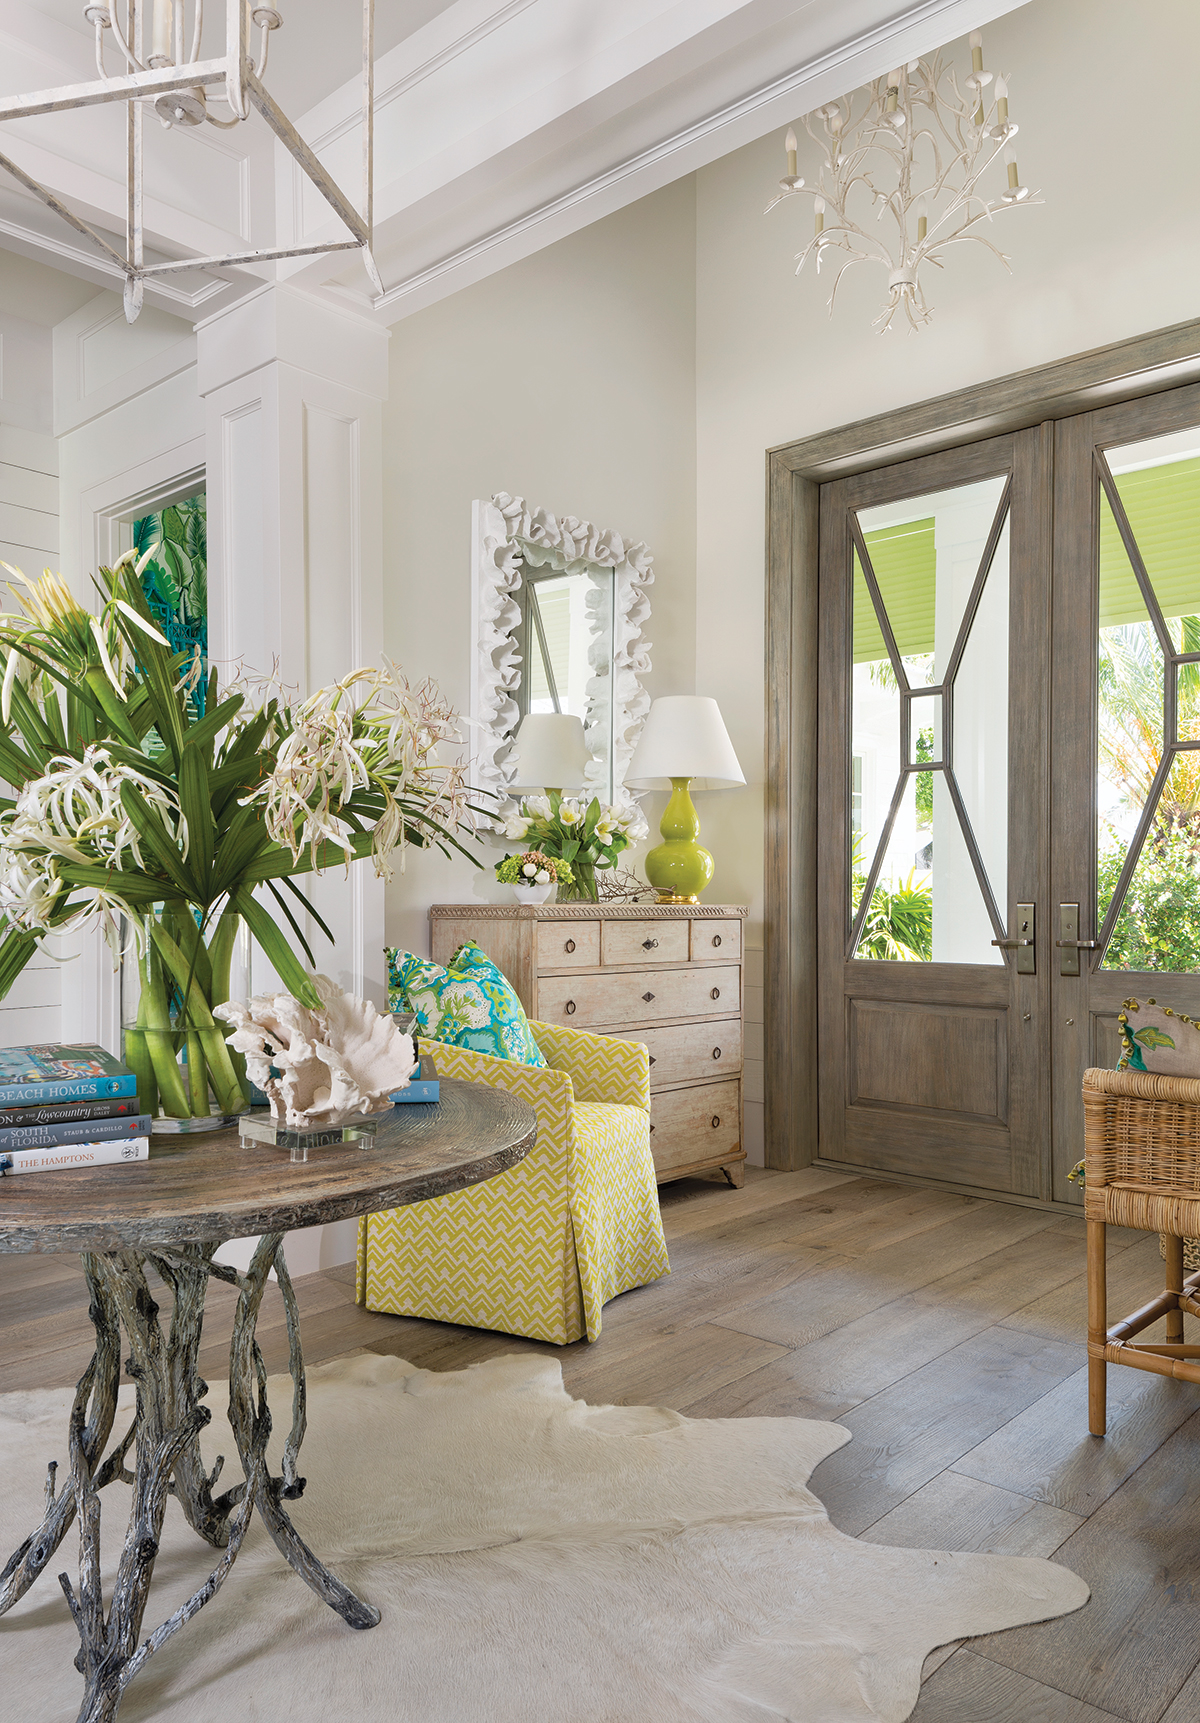 “The entry and the rest of the home is created with a mixture of antiques and new pieces, as well as some reproductions and modern pieces. So, you really have an eclectic mix like you would have in a cottage — only with a Palm Beach feel,” interior designer Bethany O’Neil says. “It’s very warm and friendly.”